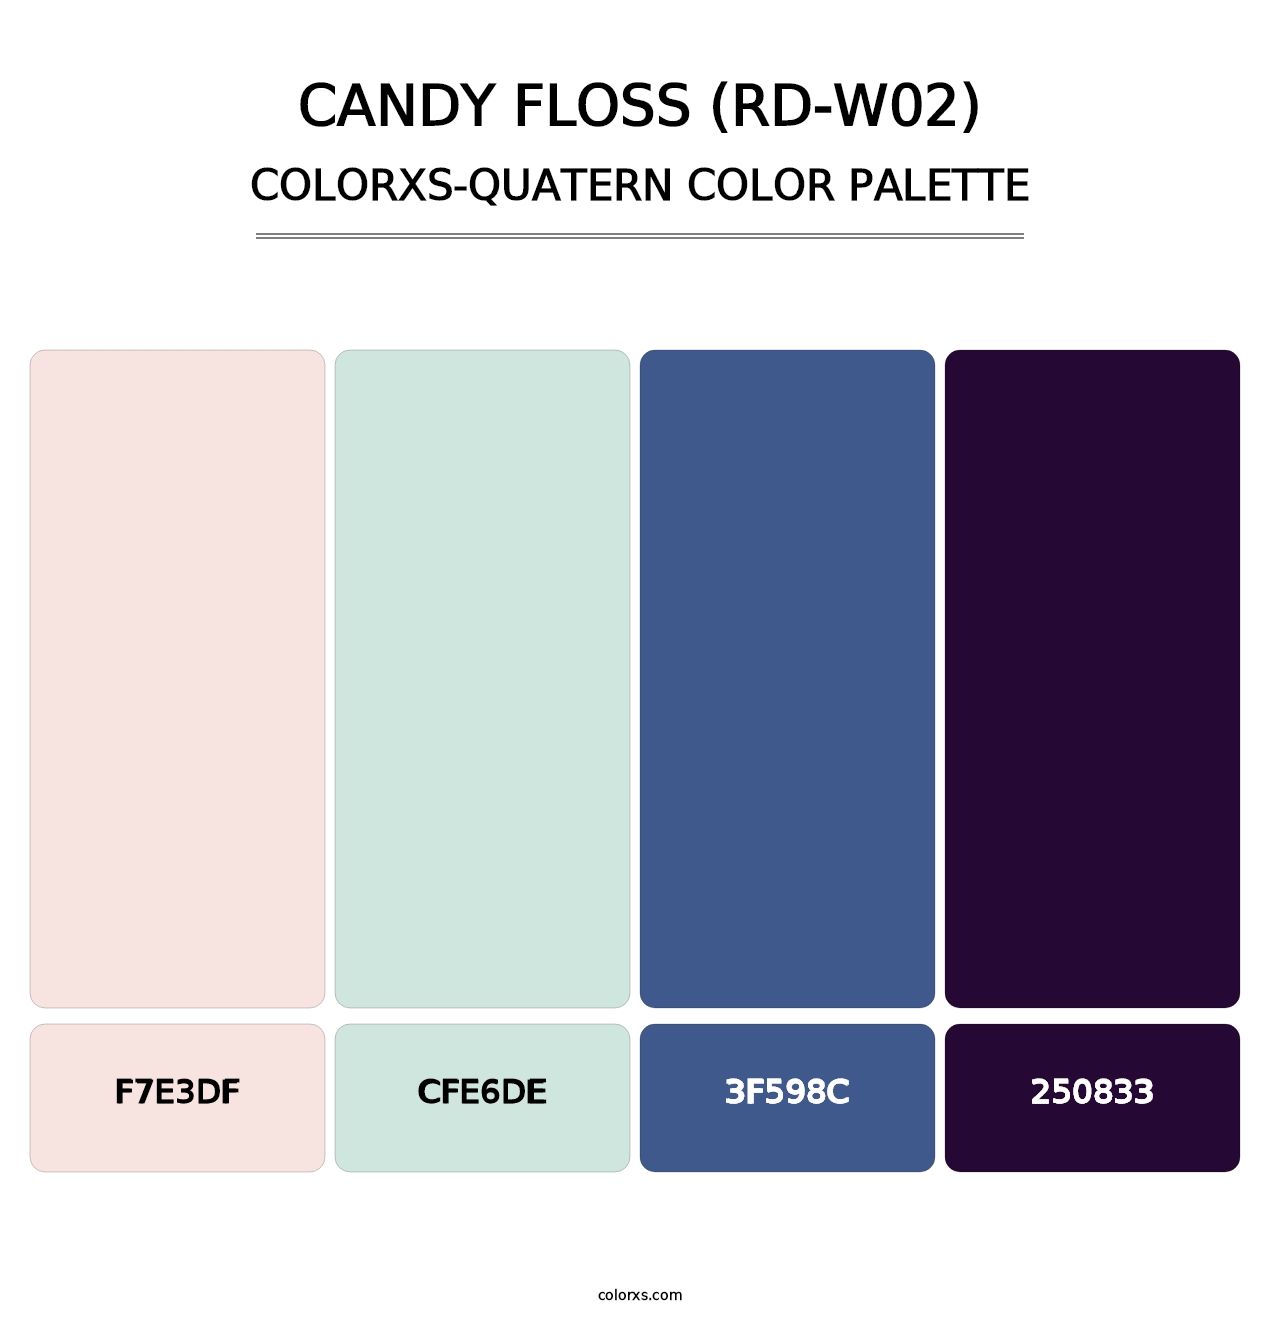 Candy Floss (RD-W02) - Colorxs Quatern Palette